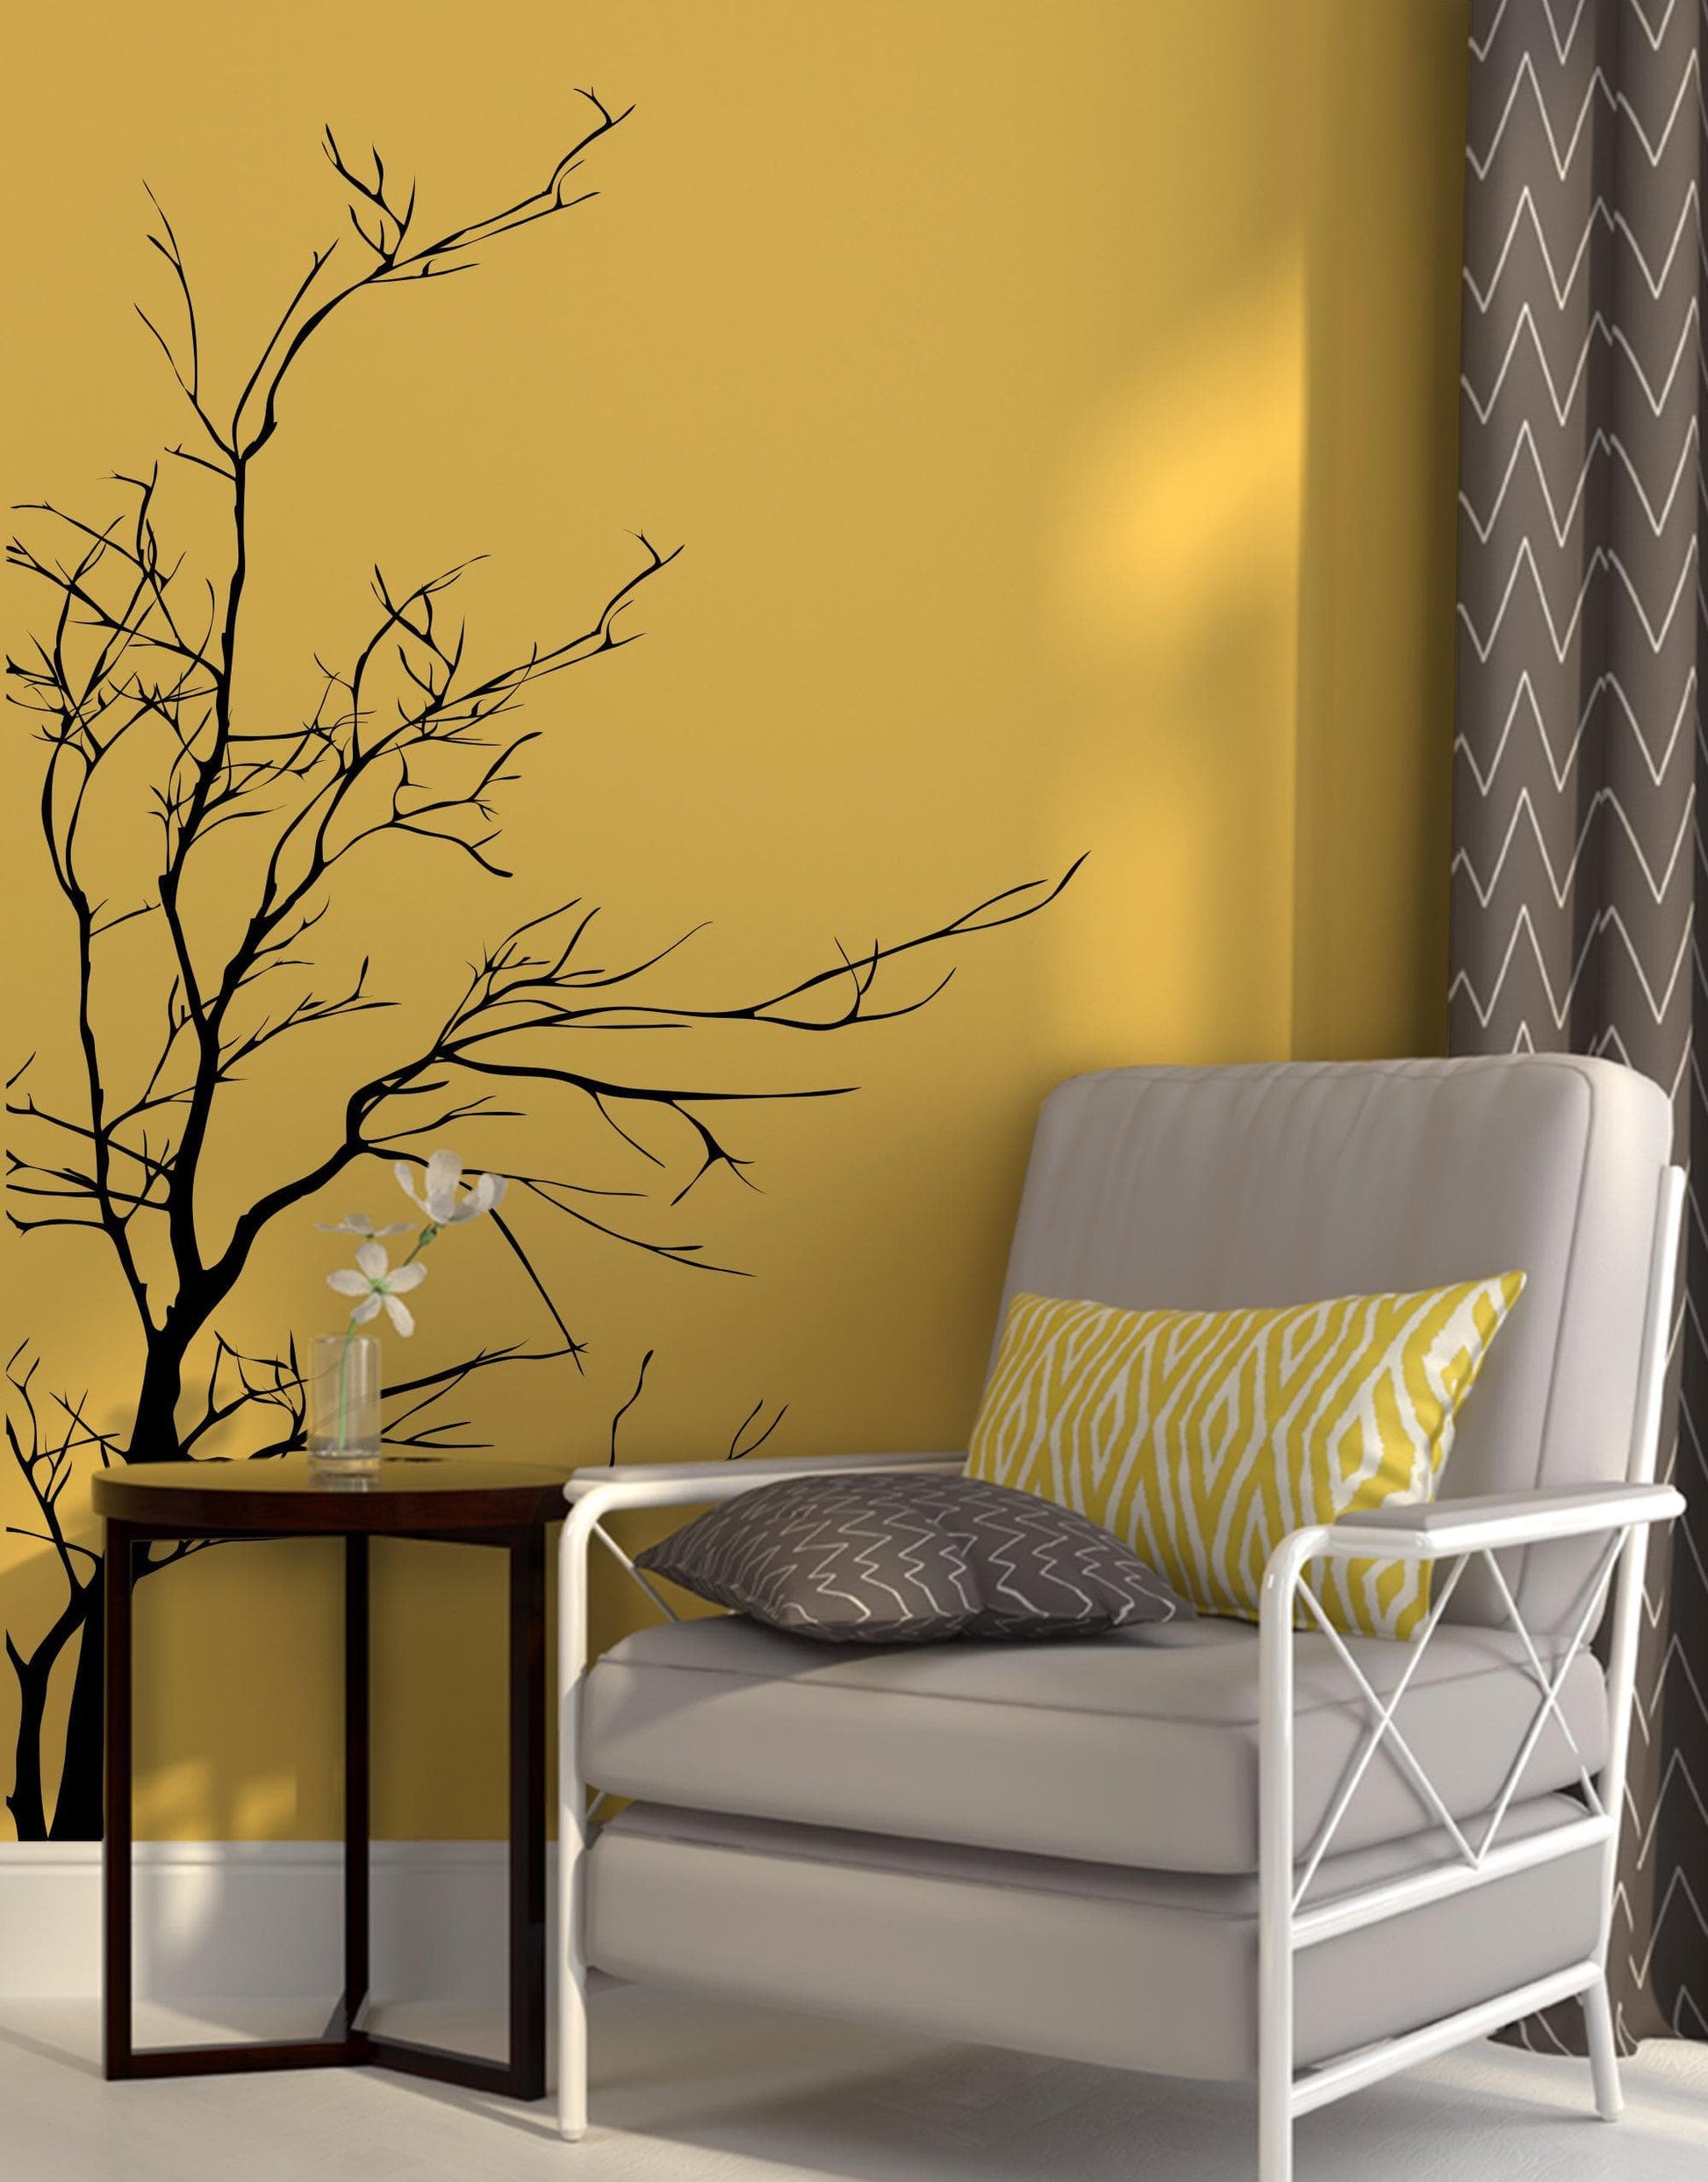 A black tree decal on a yellow wall  near a gray chair.